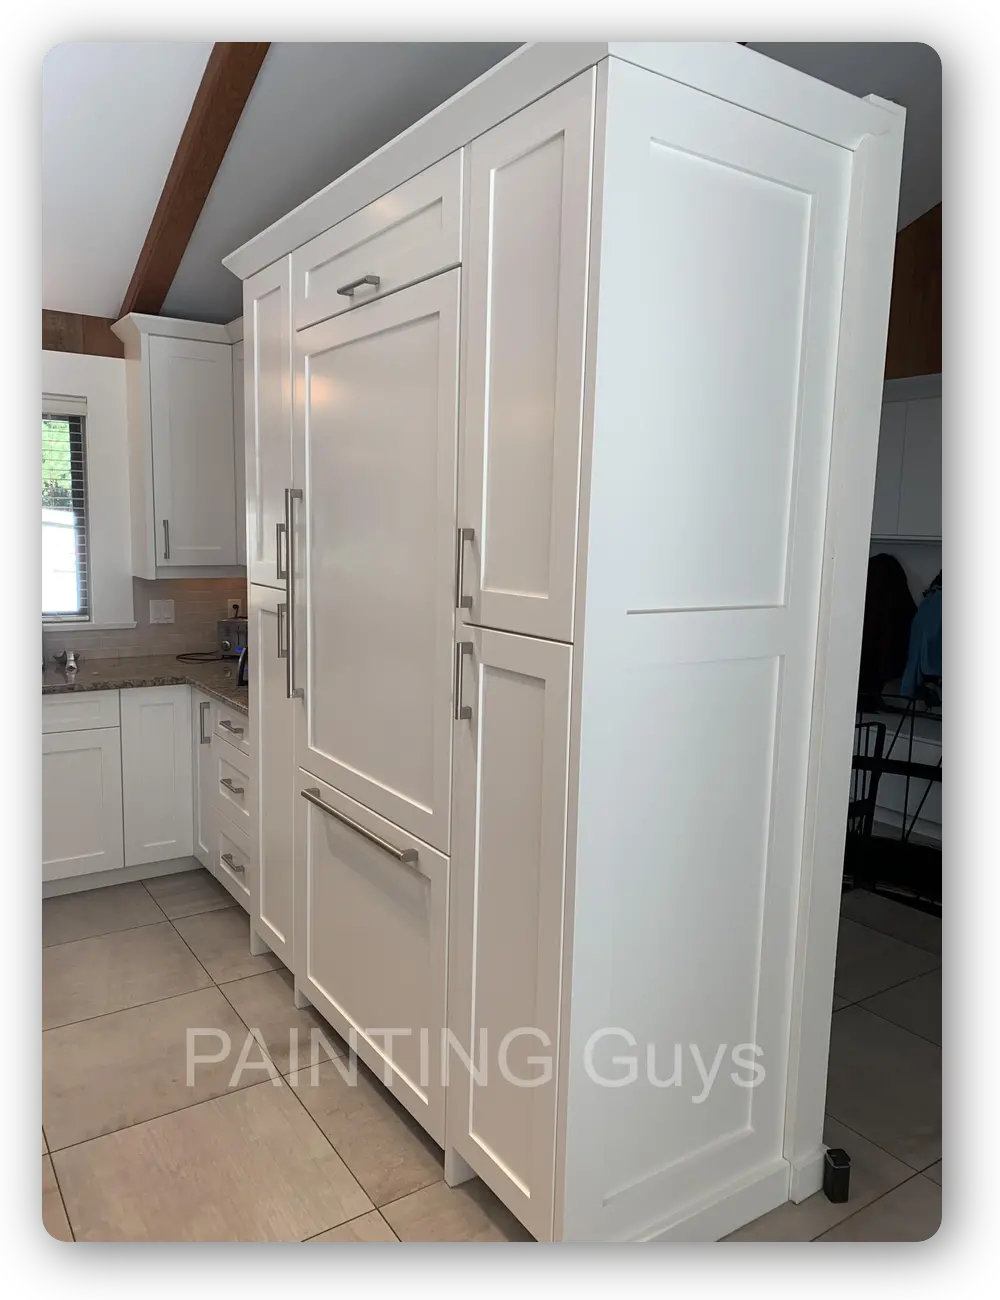 Painting a Built-in Refrigerator